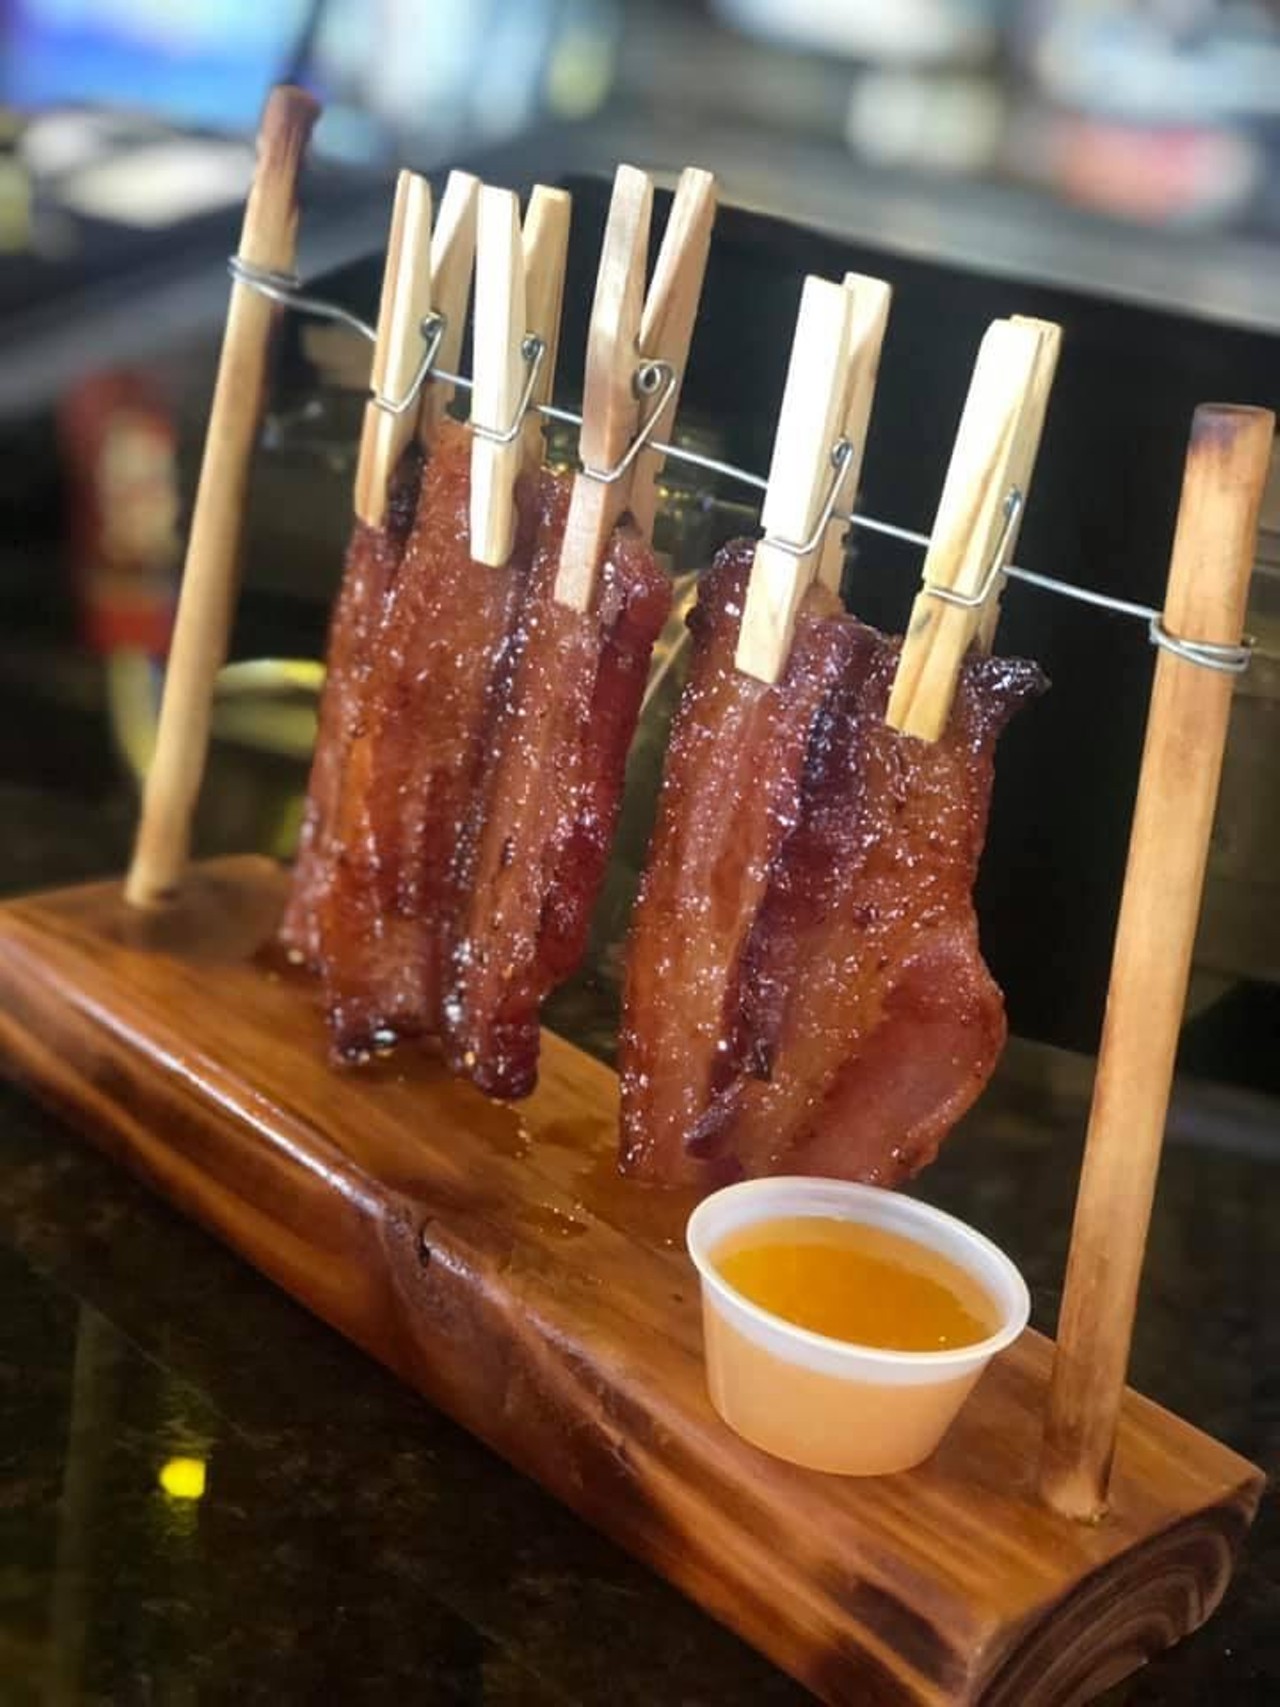 Will Lucy Cooper's add their signature clothesline bacon to their Bloody Marys?